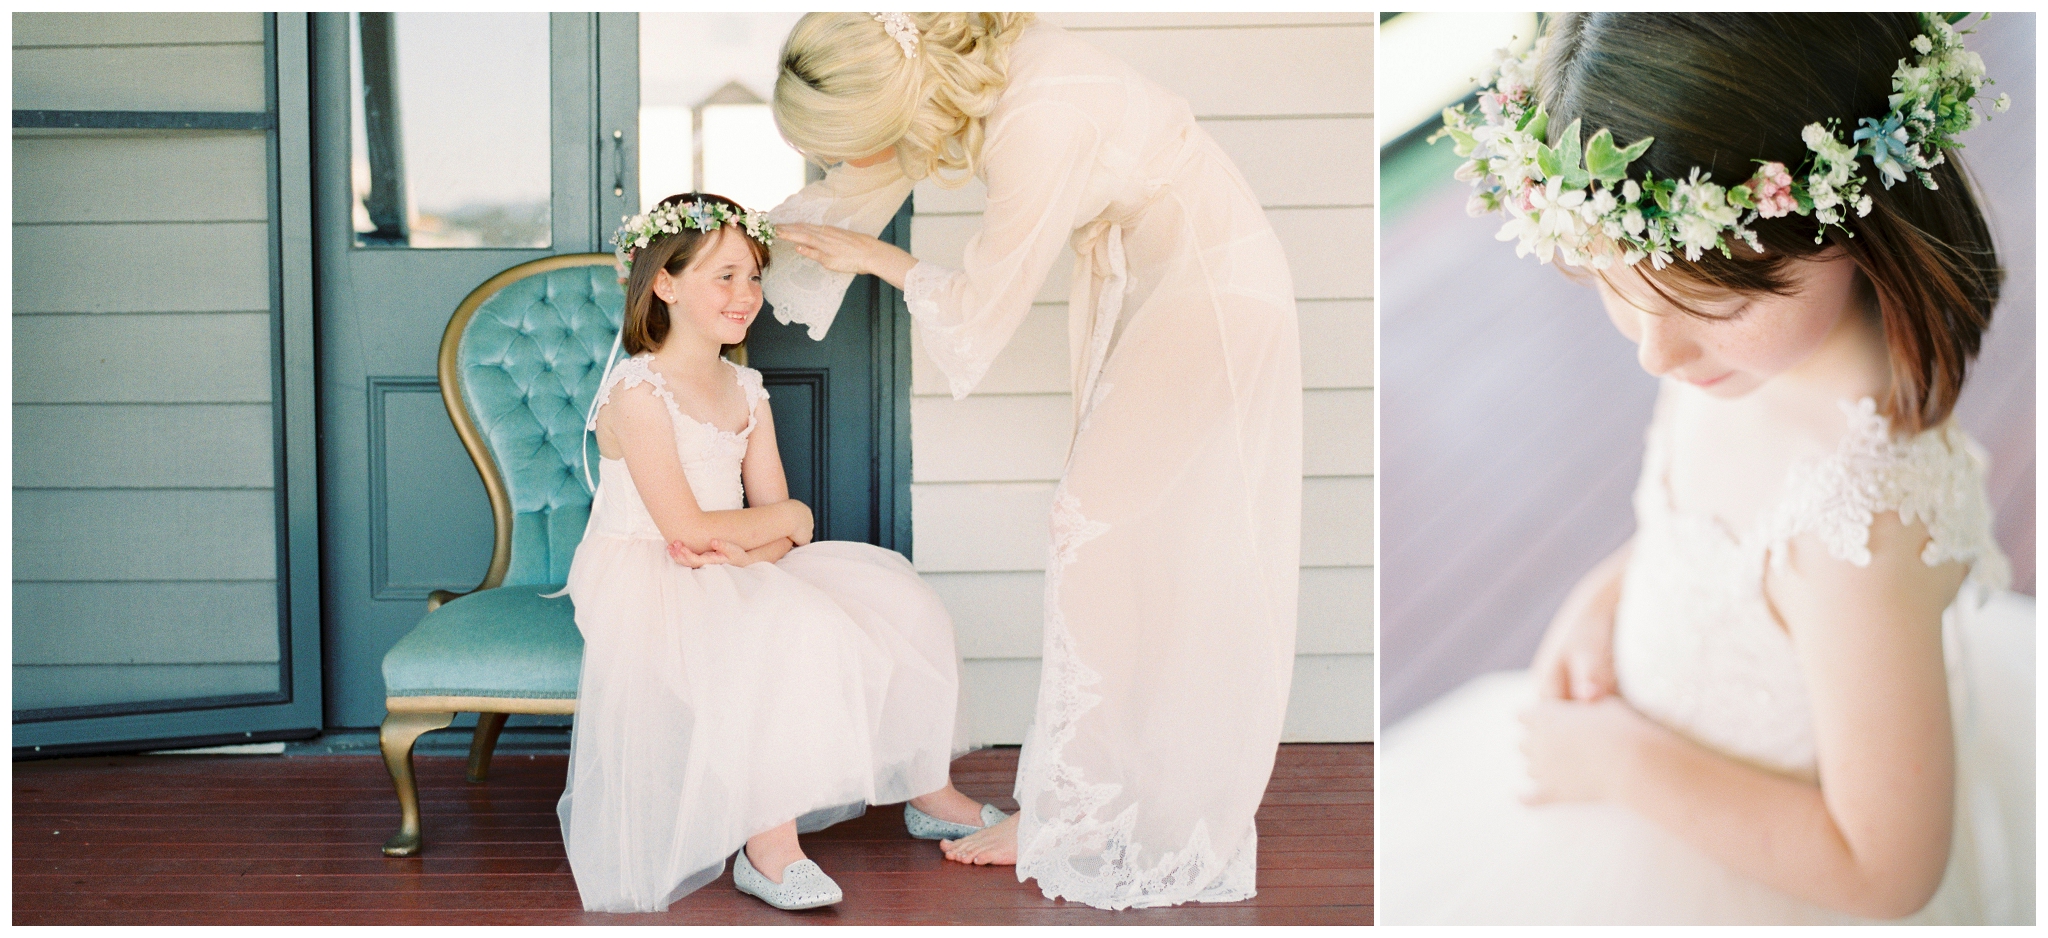 Tegan and Alex Wedding at Albert River Wines by Casey Jane Photography 11